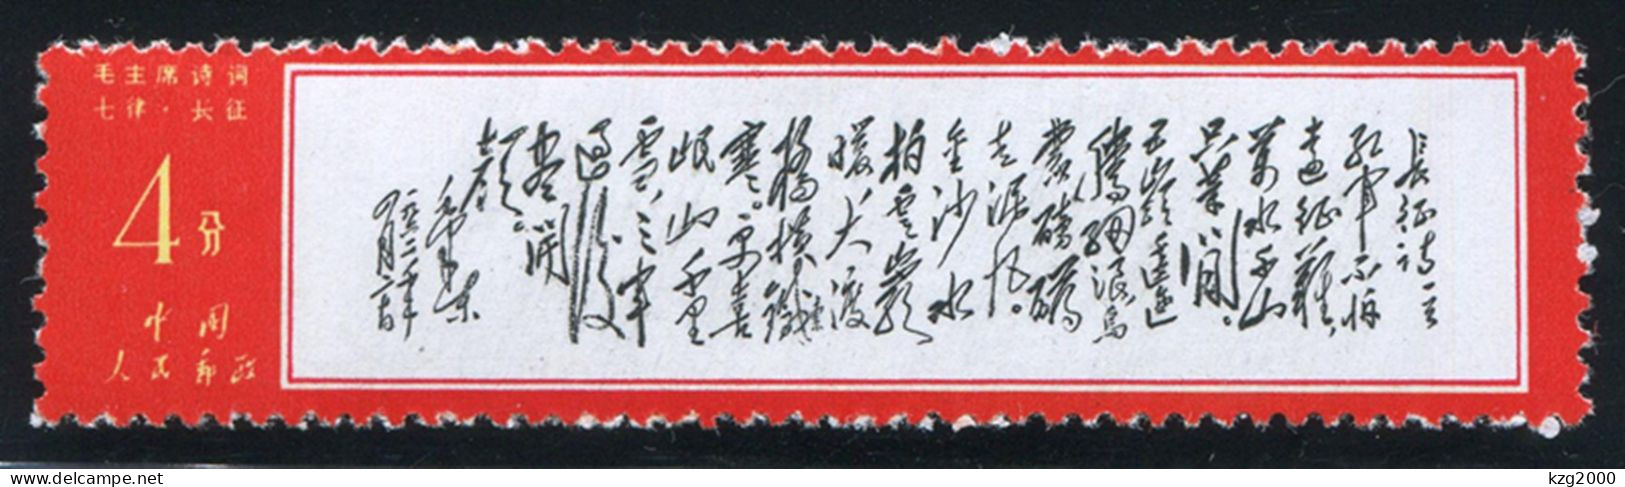 China Stamp 1967 W7 Chairman Mao Poem Stamps 4C ( Chang Zheng  ) OG - Neufs